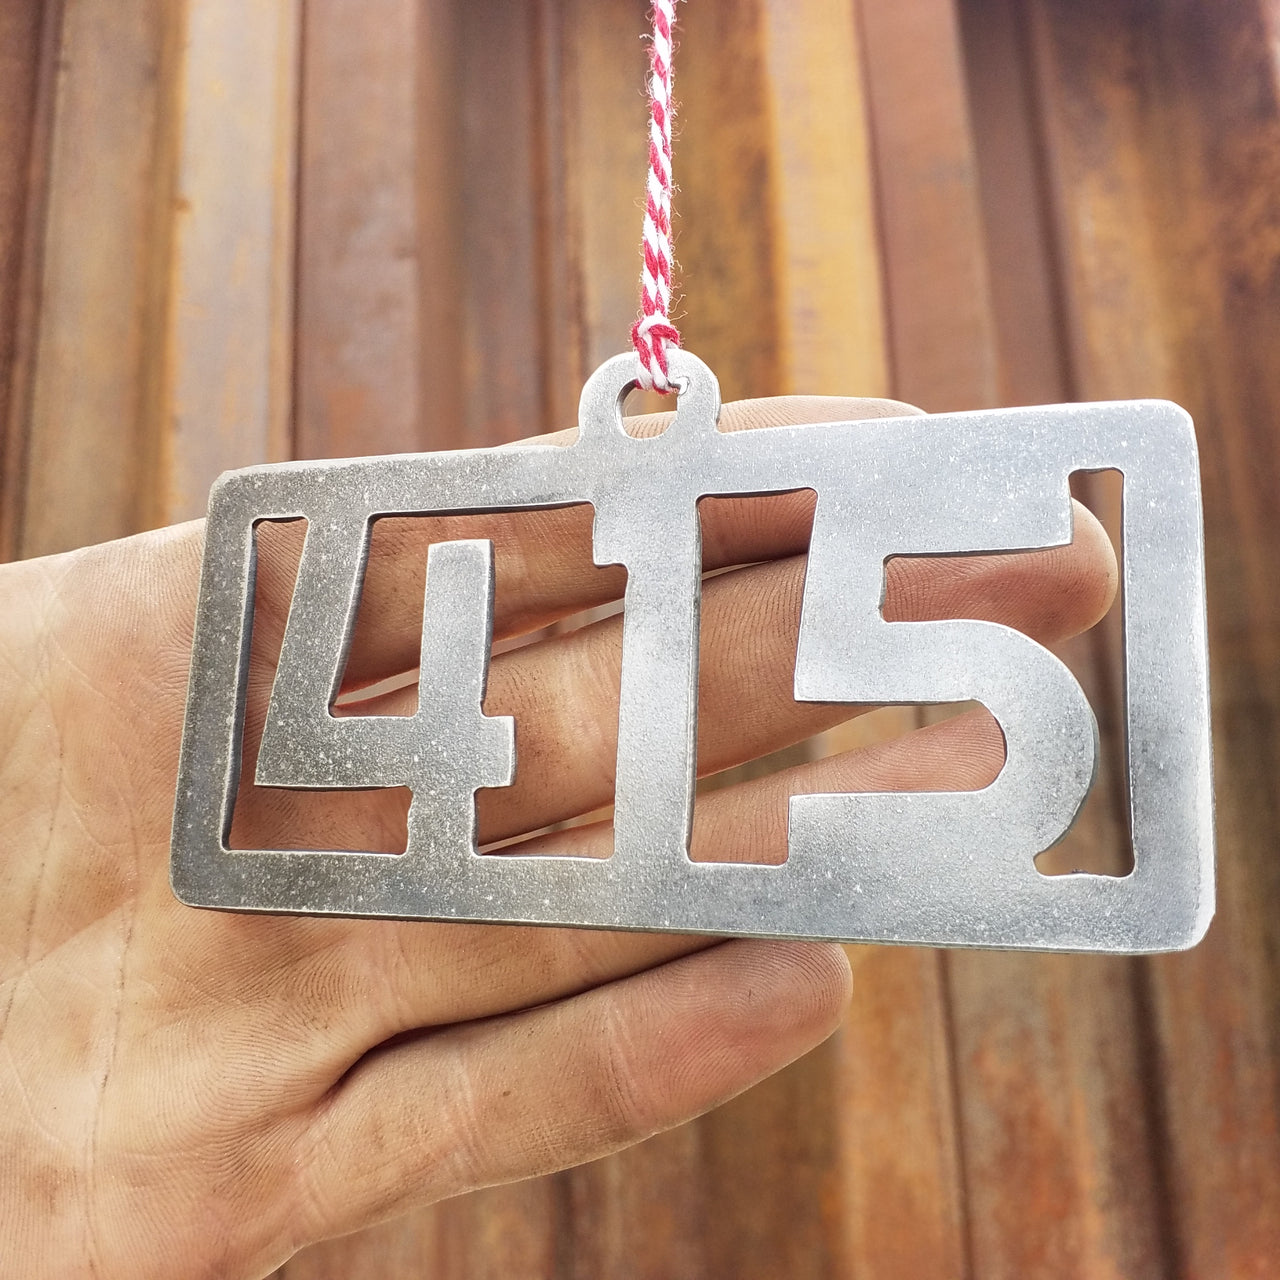 Area Code Christmas Ornament - FREE SHIPPING, Stocking Stuffer, Holiday Gift, Tree